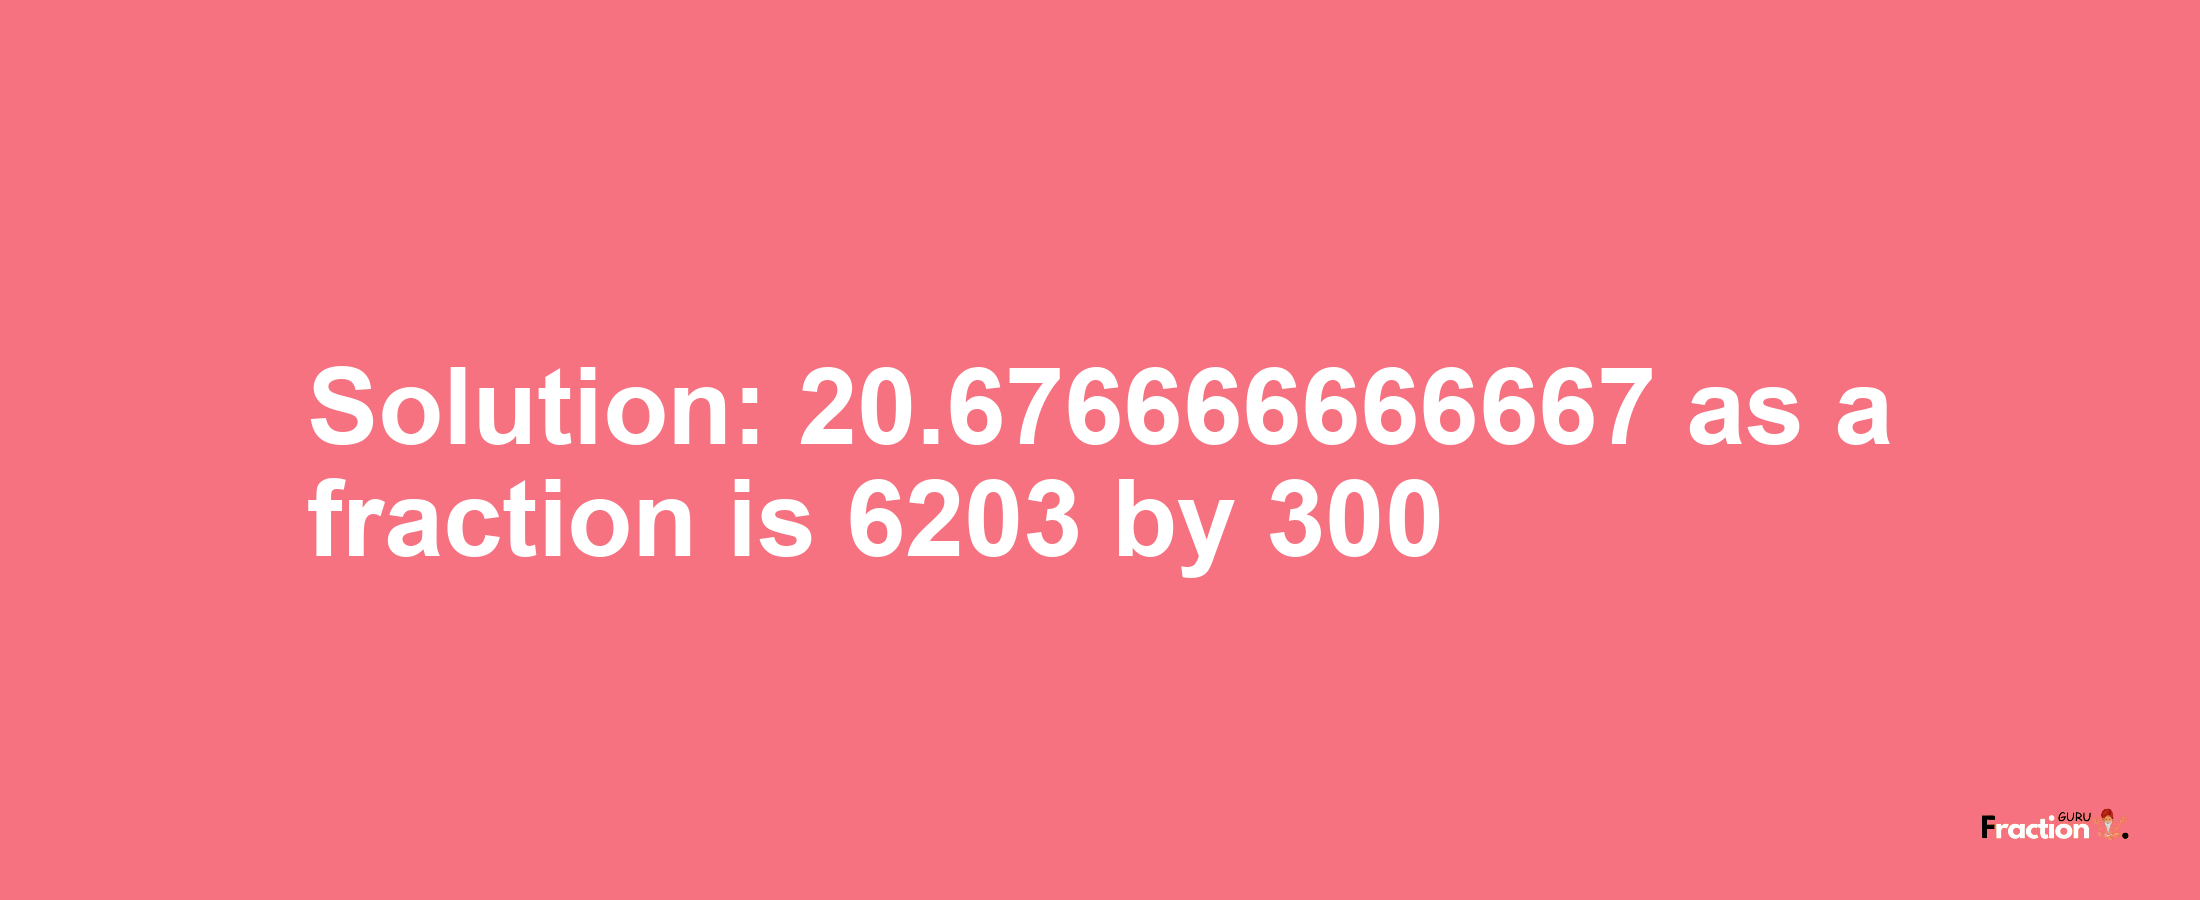 Solution:20.676666666667 as a fraction is 6203/300